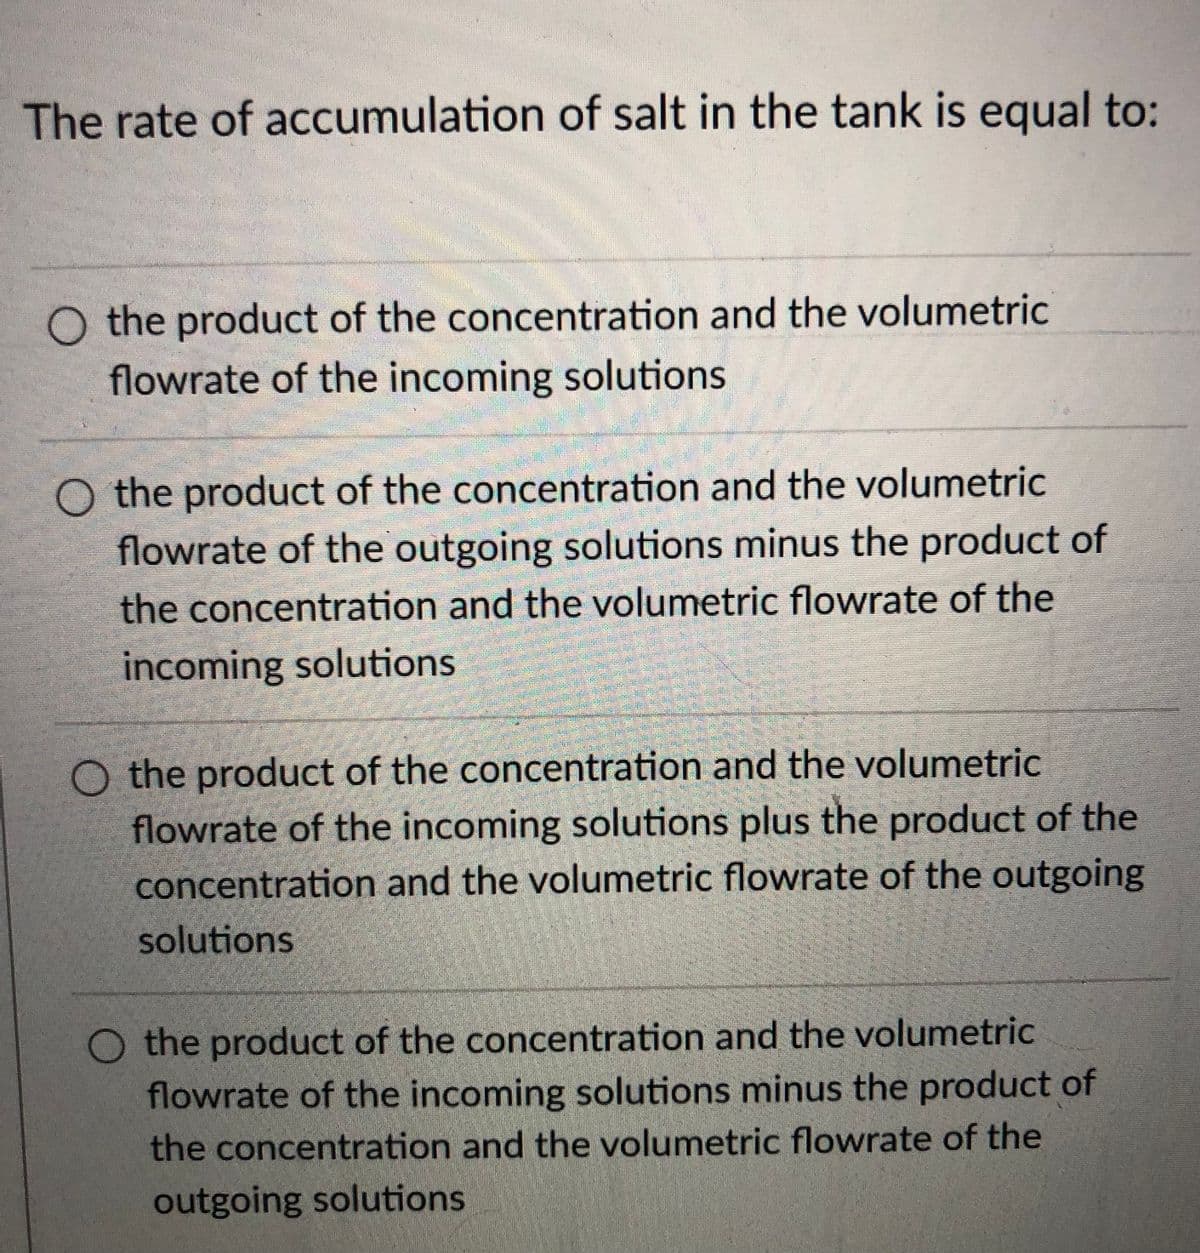 The rate of accumulation of salt in the tank is equal to:
O the product of the concentration and the volumetric
flowrate of the incoming solutions
the product of the concentration and the volumetric
flowrate of the outgoing solutions minus the product of
the concentration and the volumetric flowrate of the
incoming solutions
O the product of the concentration and the volumetric
flowrate of the incoming solutions plus the product of the
concentration and the volumetric flowrate of the outgoing
solutions
O the product of the concentration and the volumetric
flowrate of the incoming solutions minus the product of
the concentration and the volumetric flowrate of the
outgoing solutions
